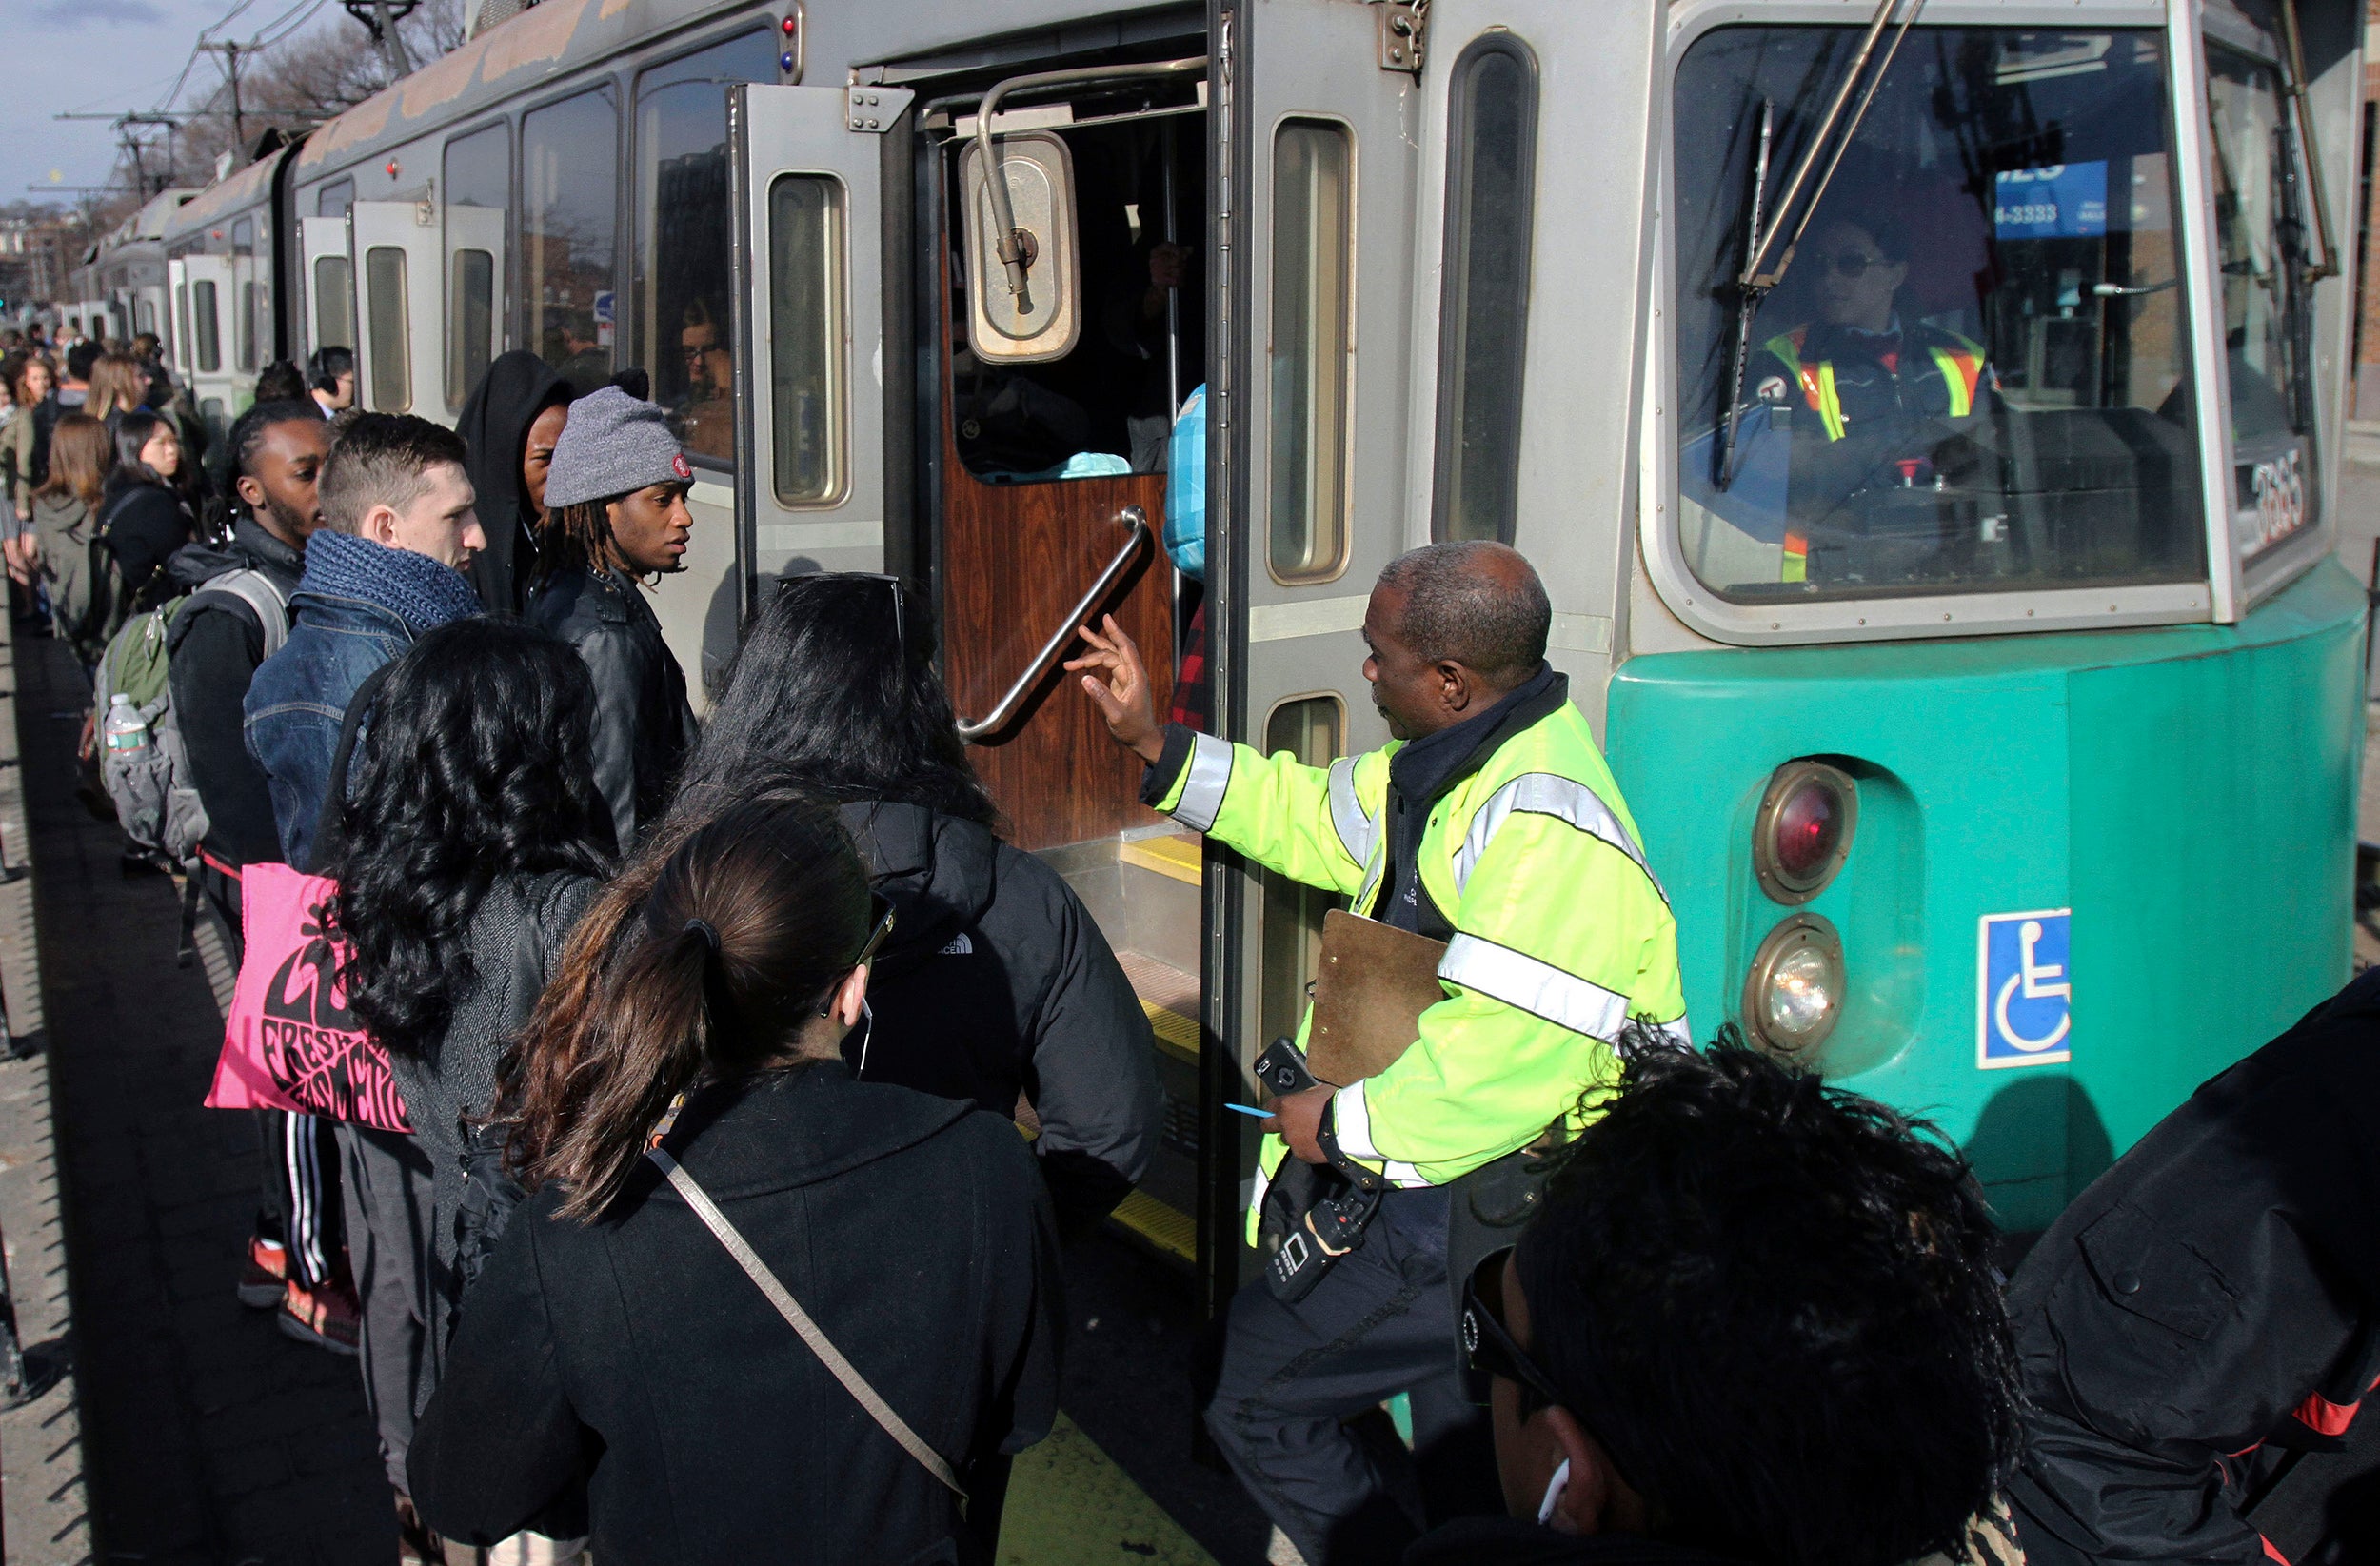 Should public transit be free? Experts weigh in on policy options ...